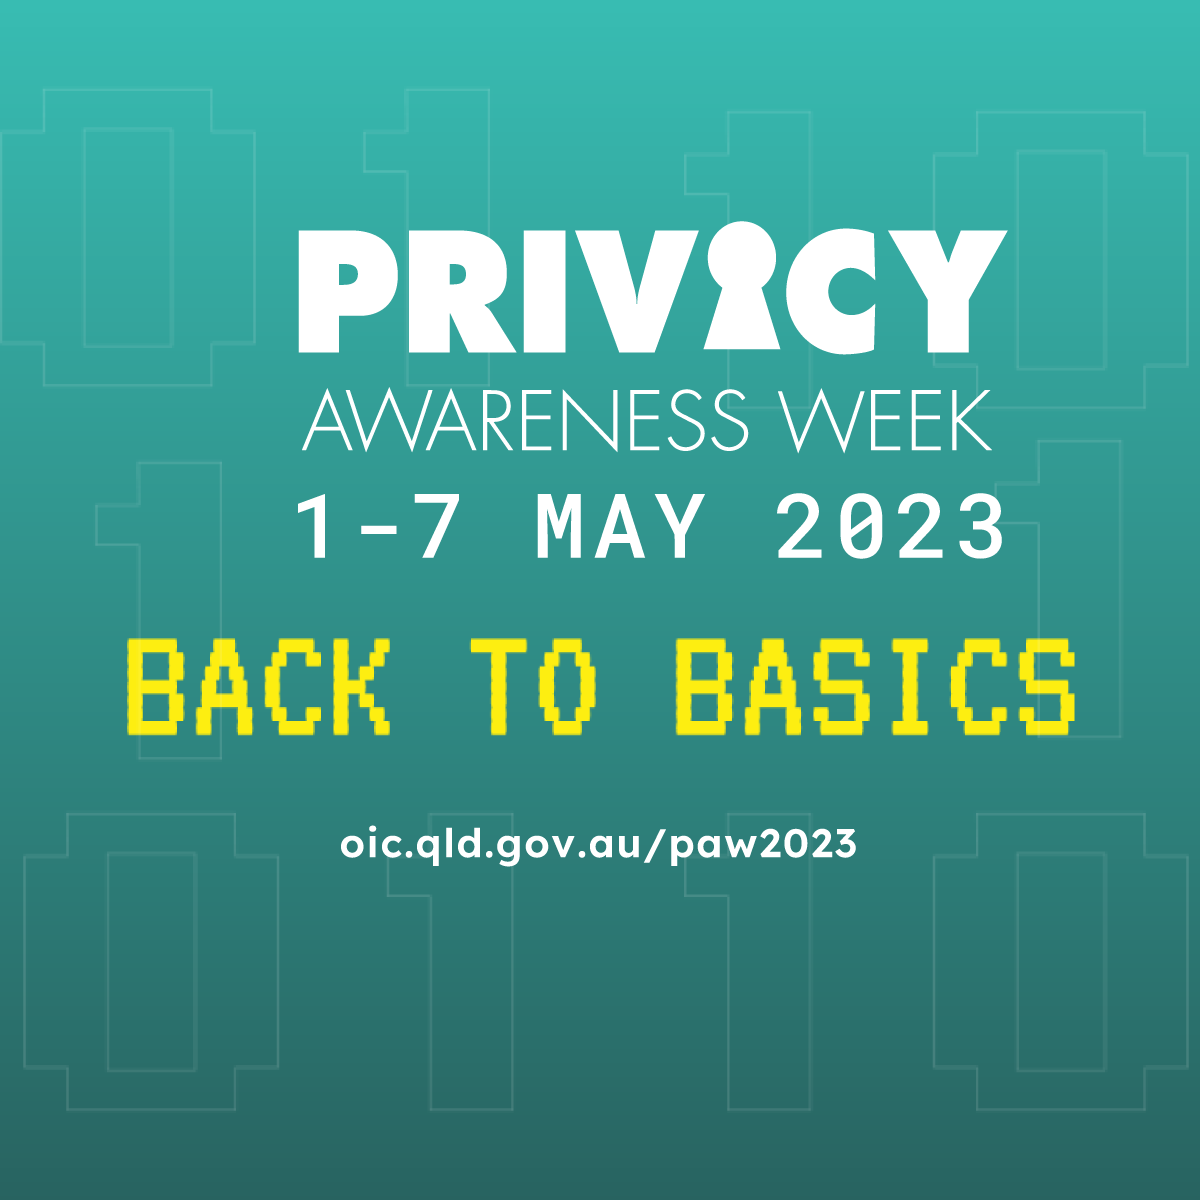 Privacy Awareness Week is an annual event raising awareness about the importance of protecting and respecting personal information.

Find out how we protect your privacy - ow.ly/XwIh50O4JpP

#PAW2023 #PrivacyAwarenessWeek #Back2Basics